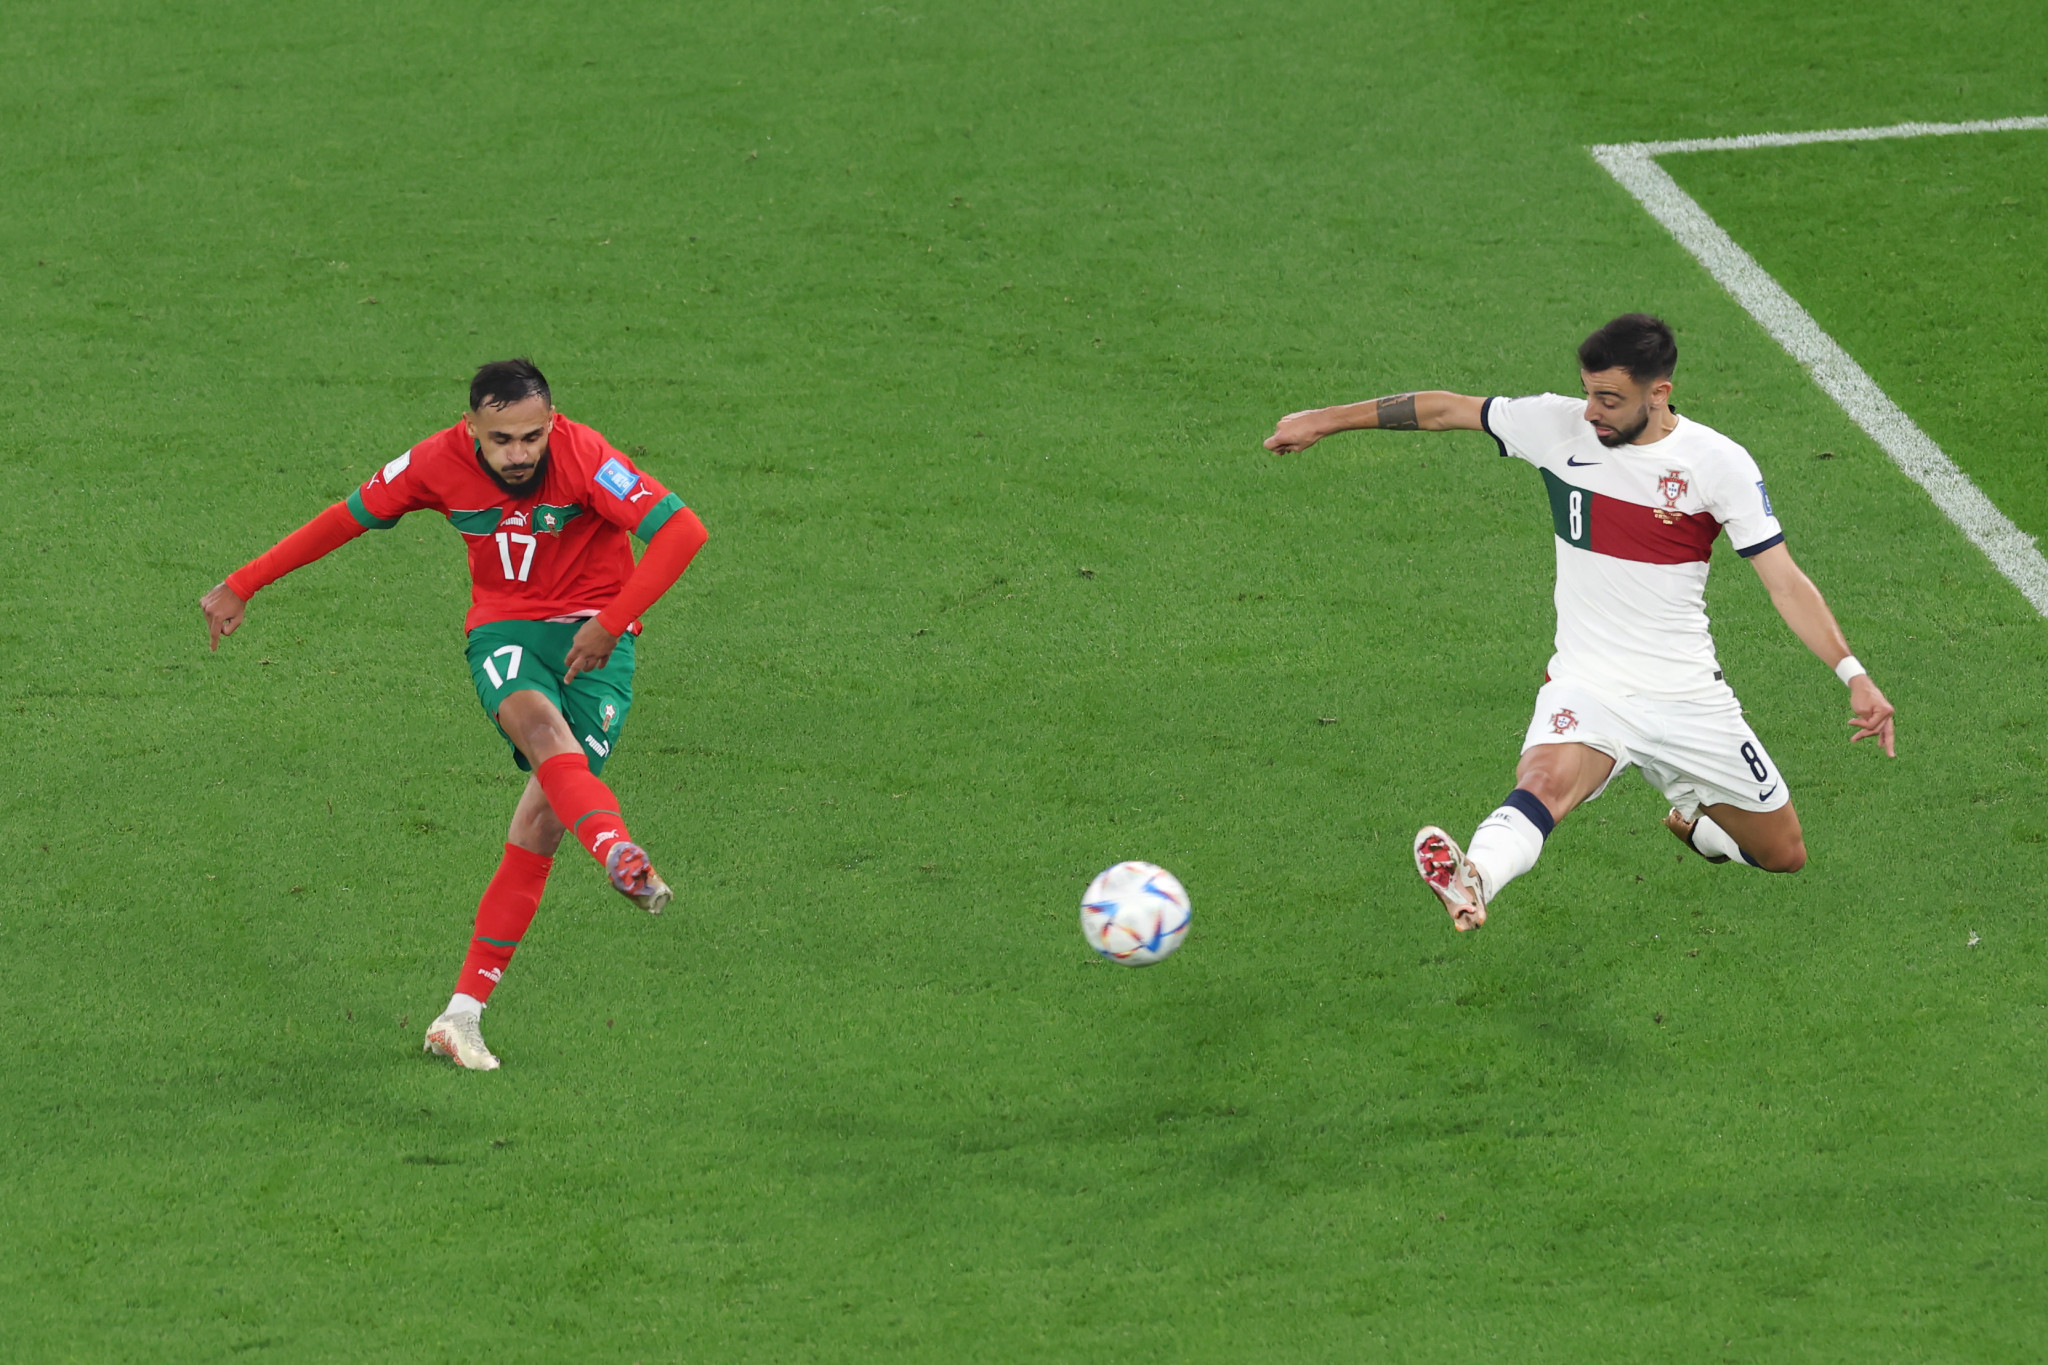 Morocco await in the final four after seeing off Portugal 1-0 ©Getty Images